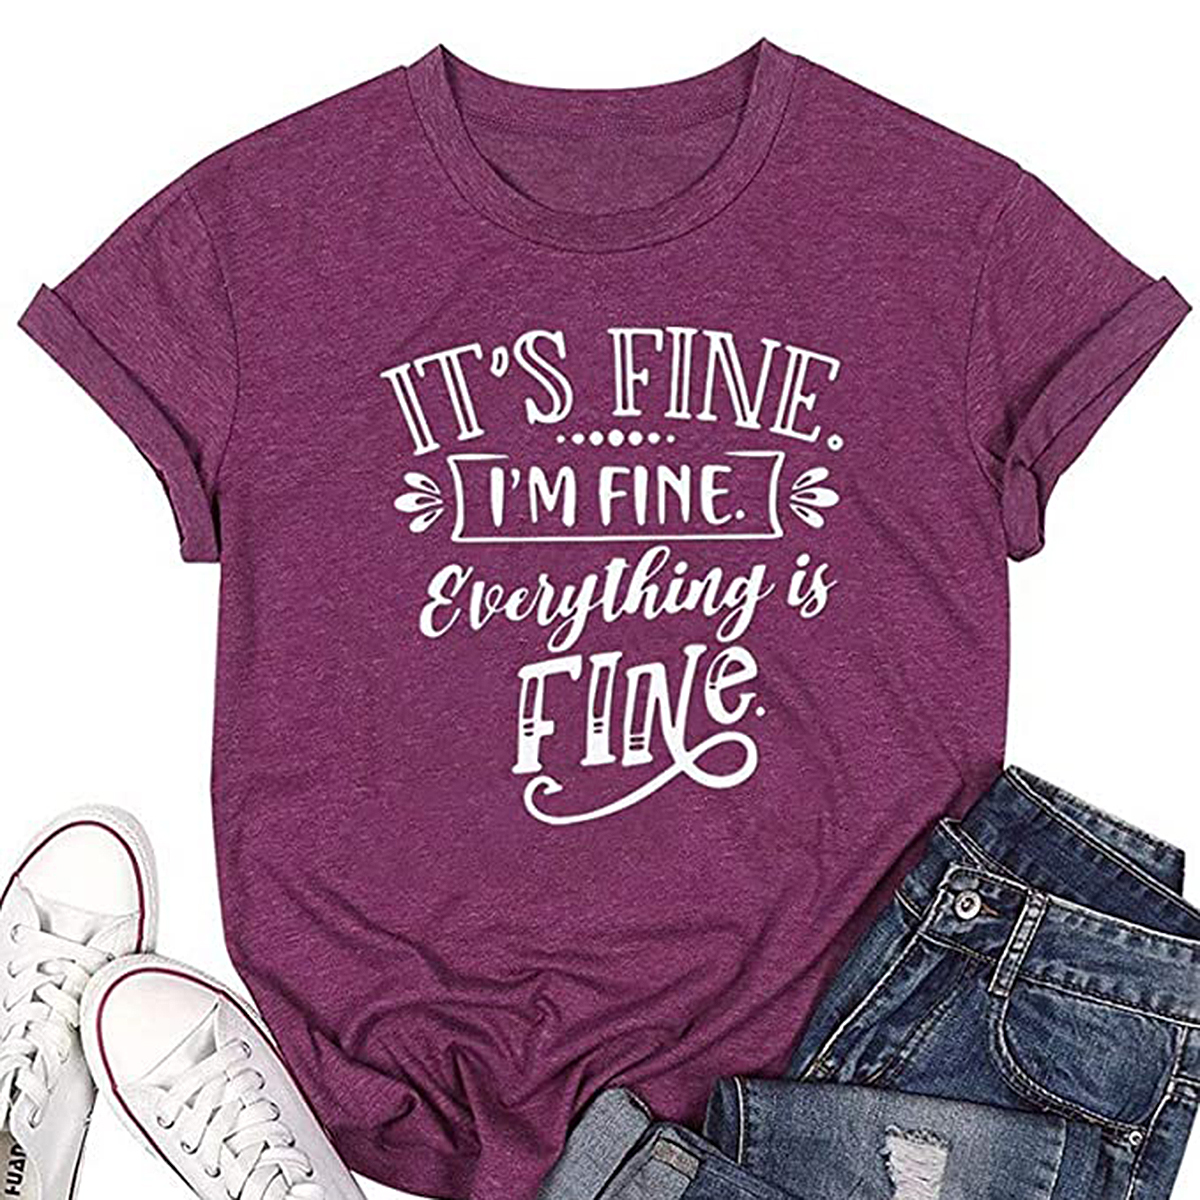 Amazon Sarcastic Graphic Tee Is What We All Need Right Now